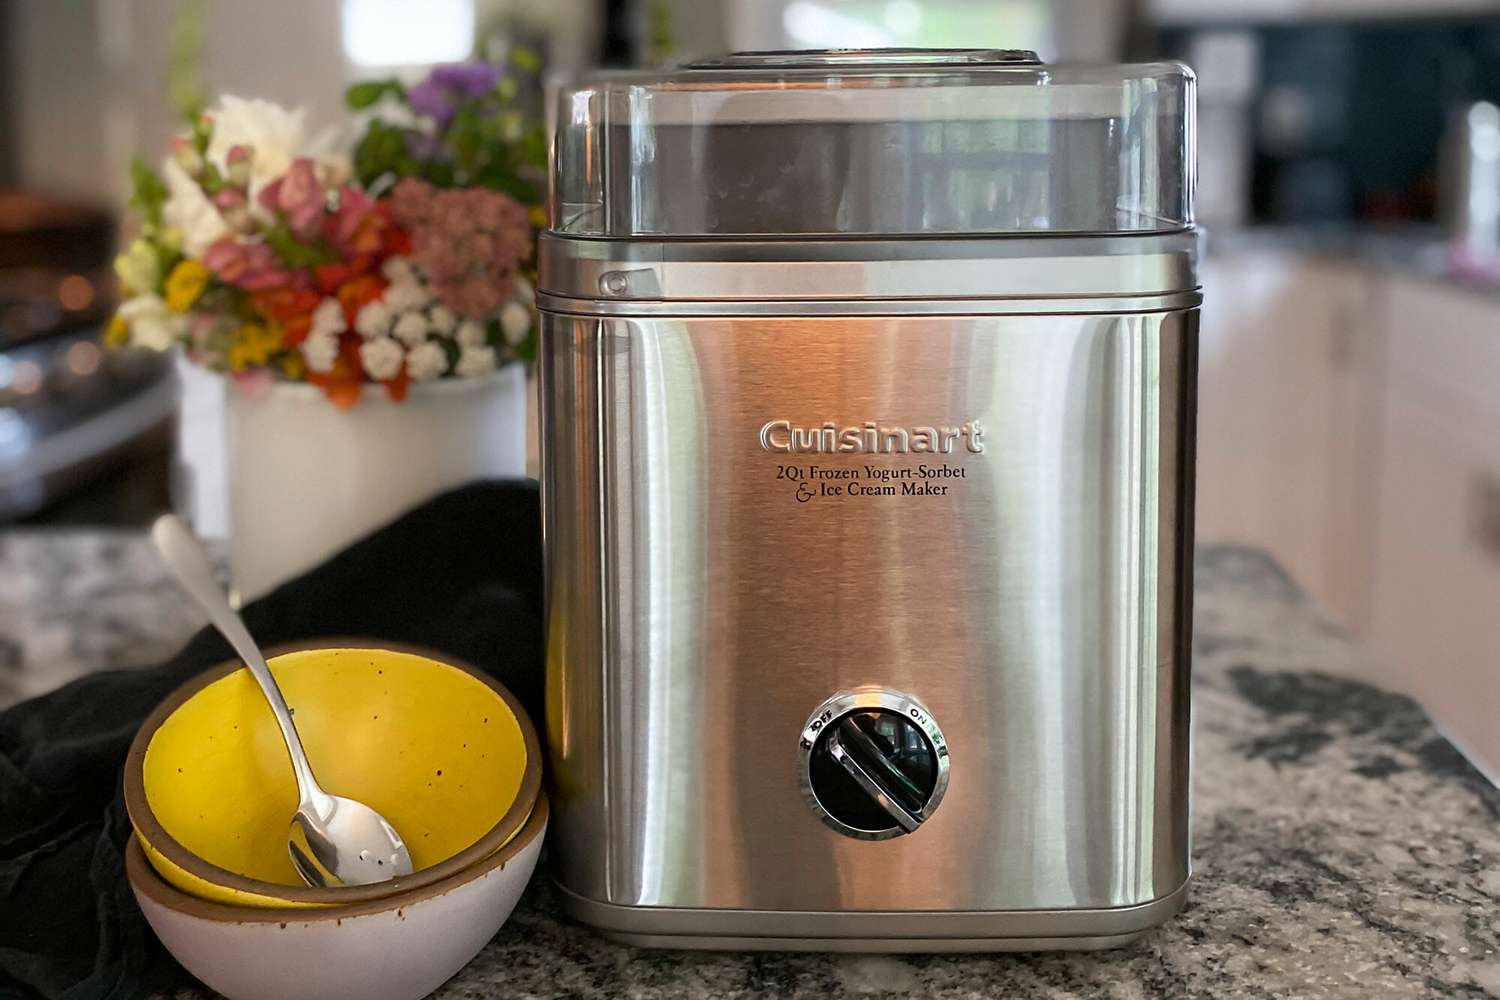 How To Use The Cuisinart Ice Cream Maker?